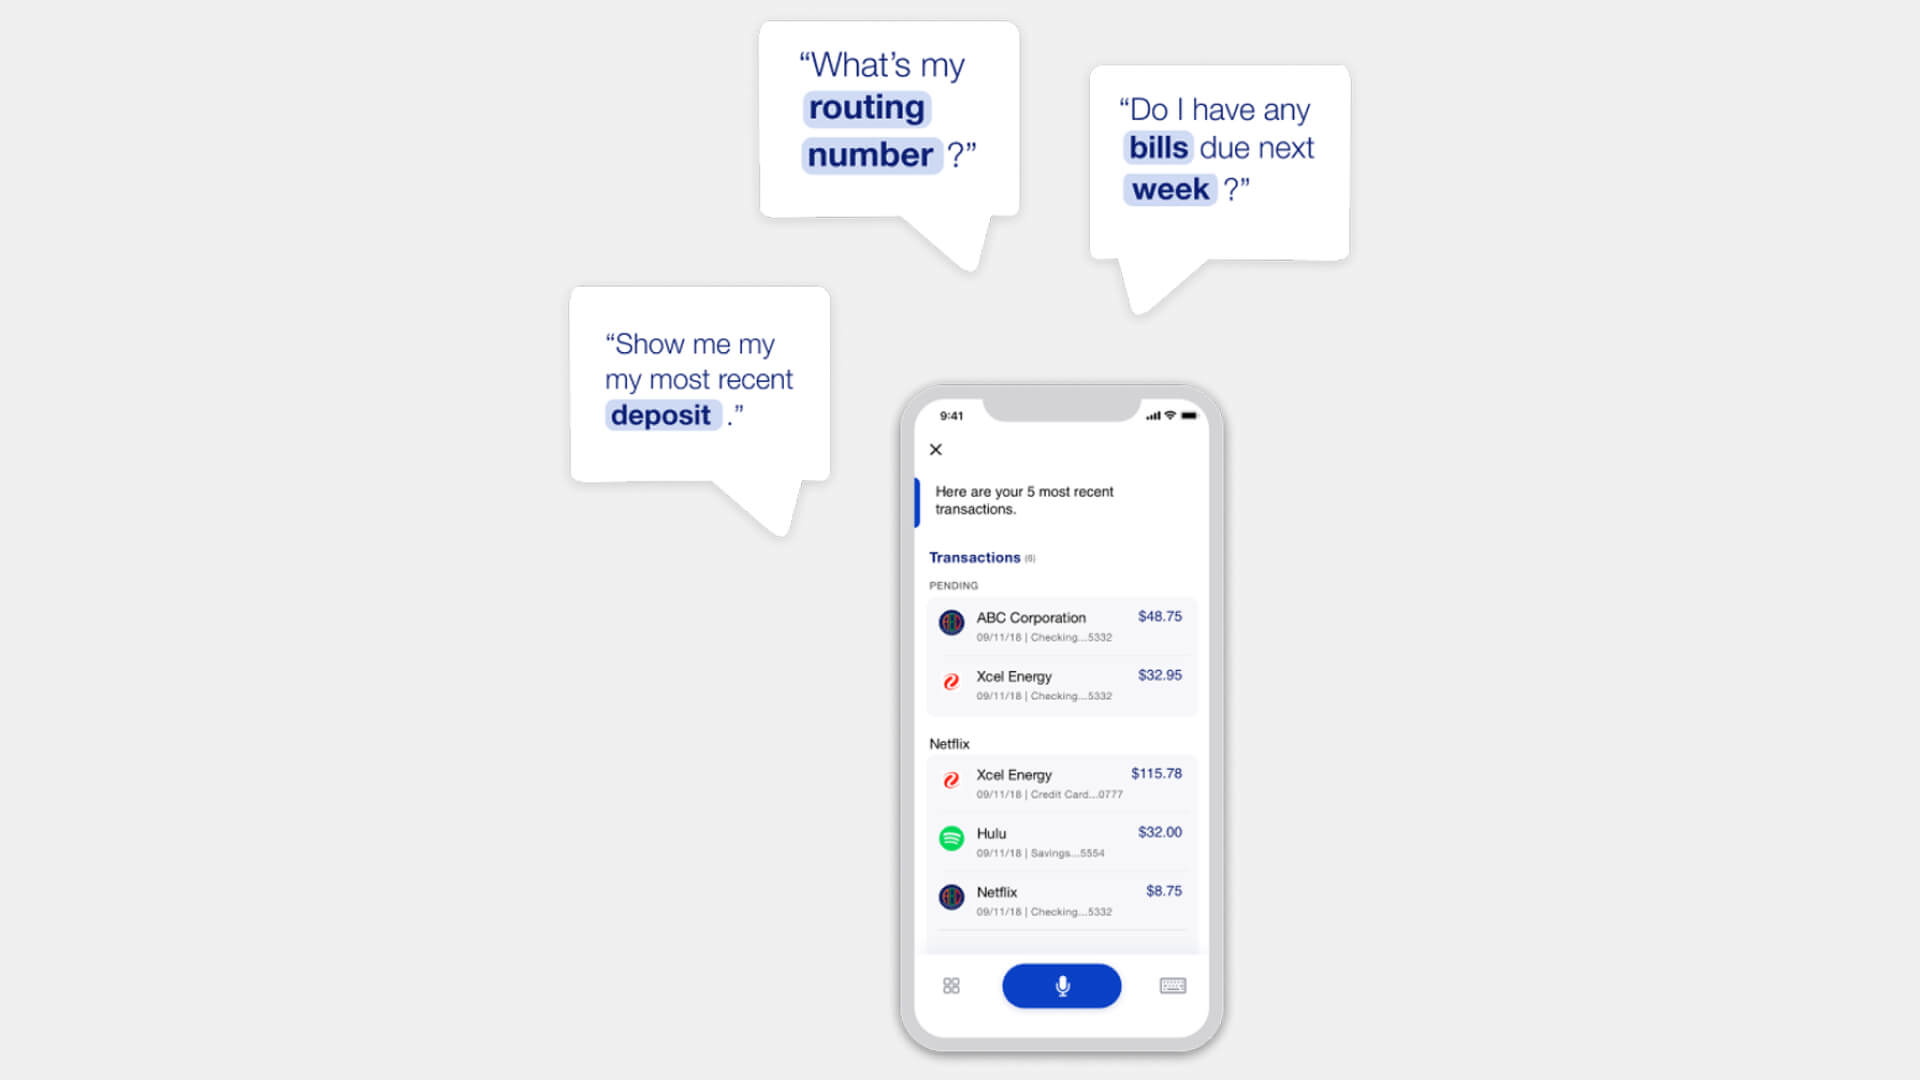 US Bank's virtual assistant chatbot - an example of conversational AI in banking